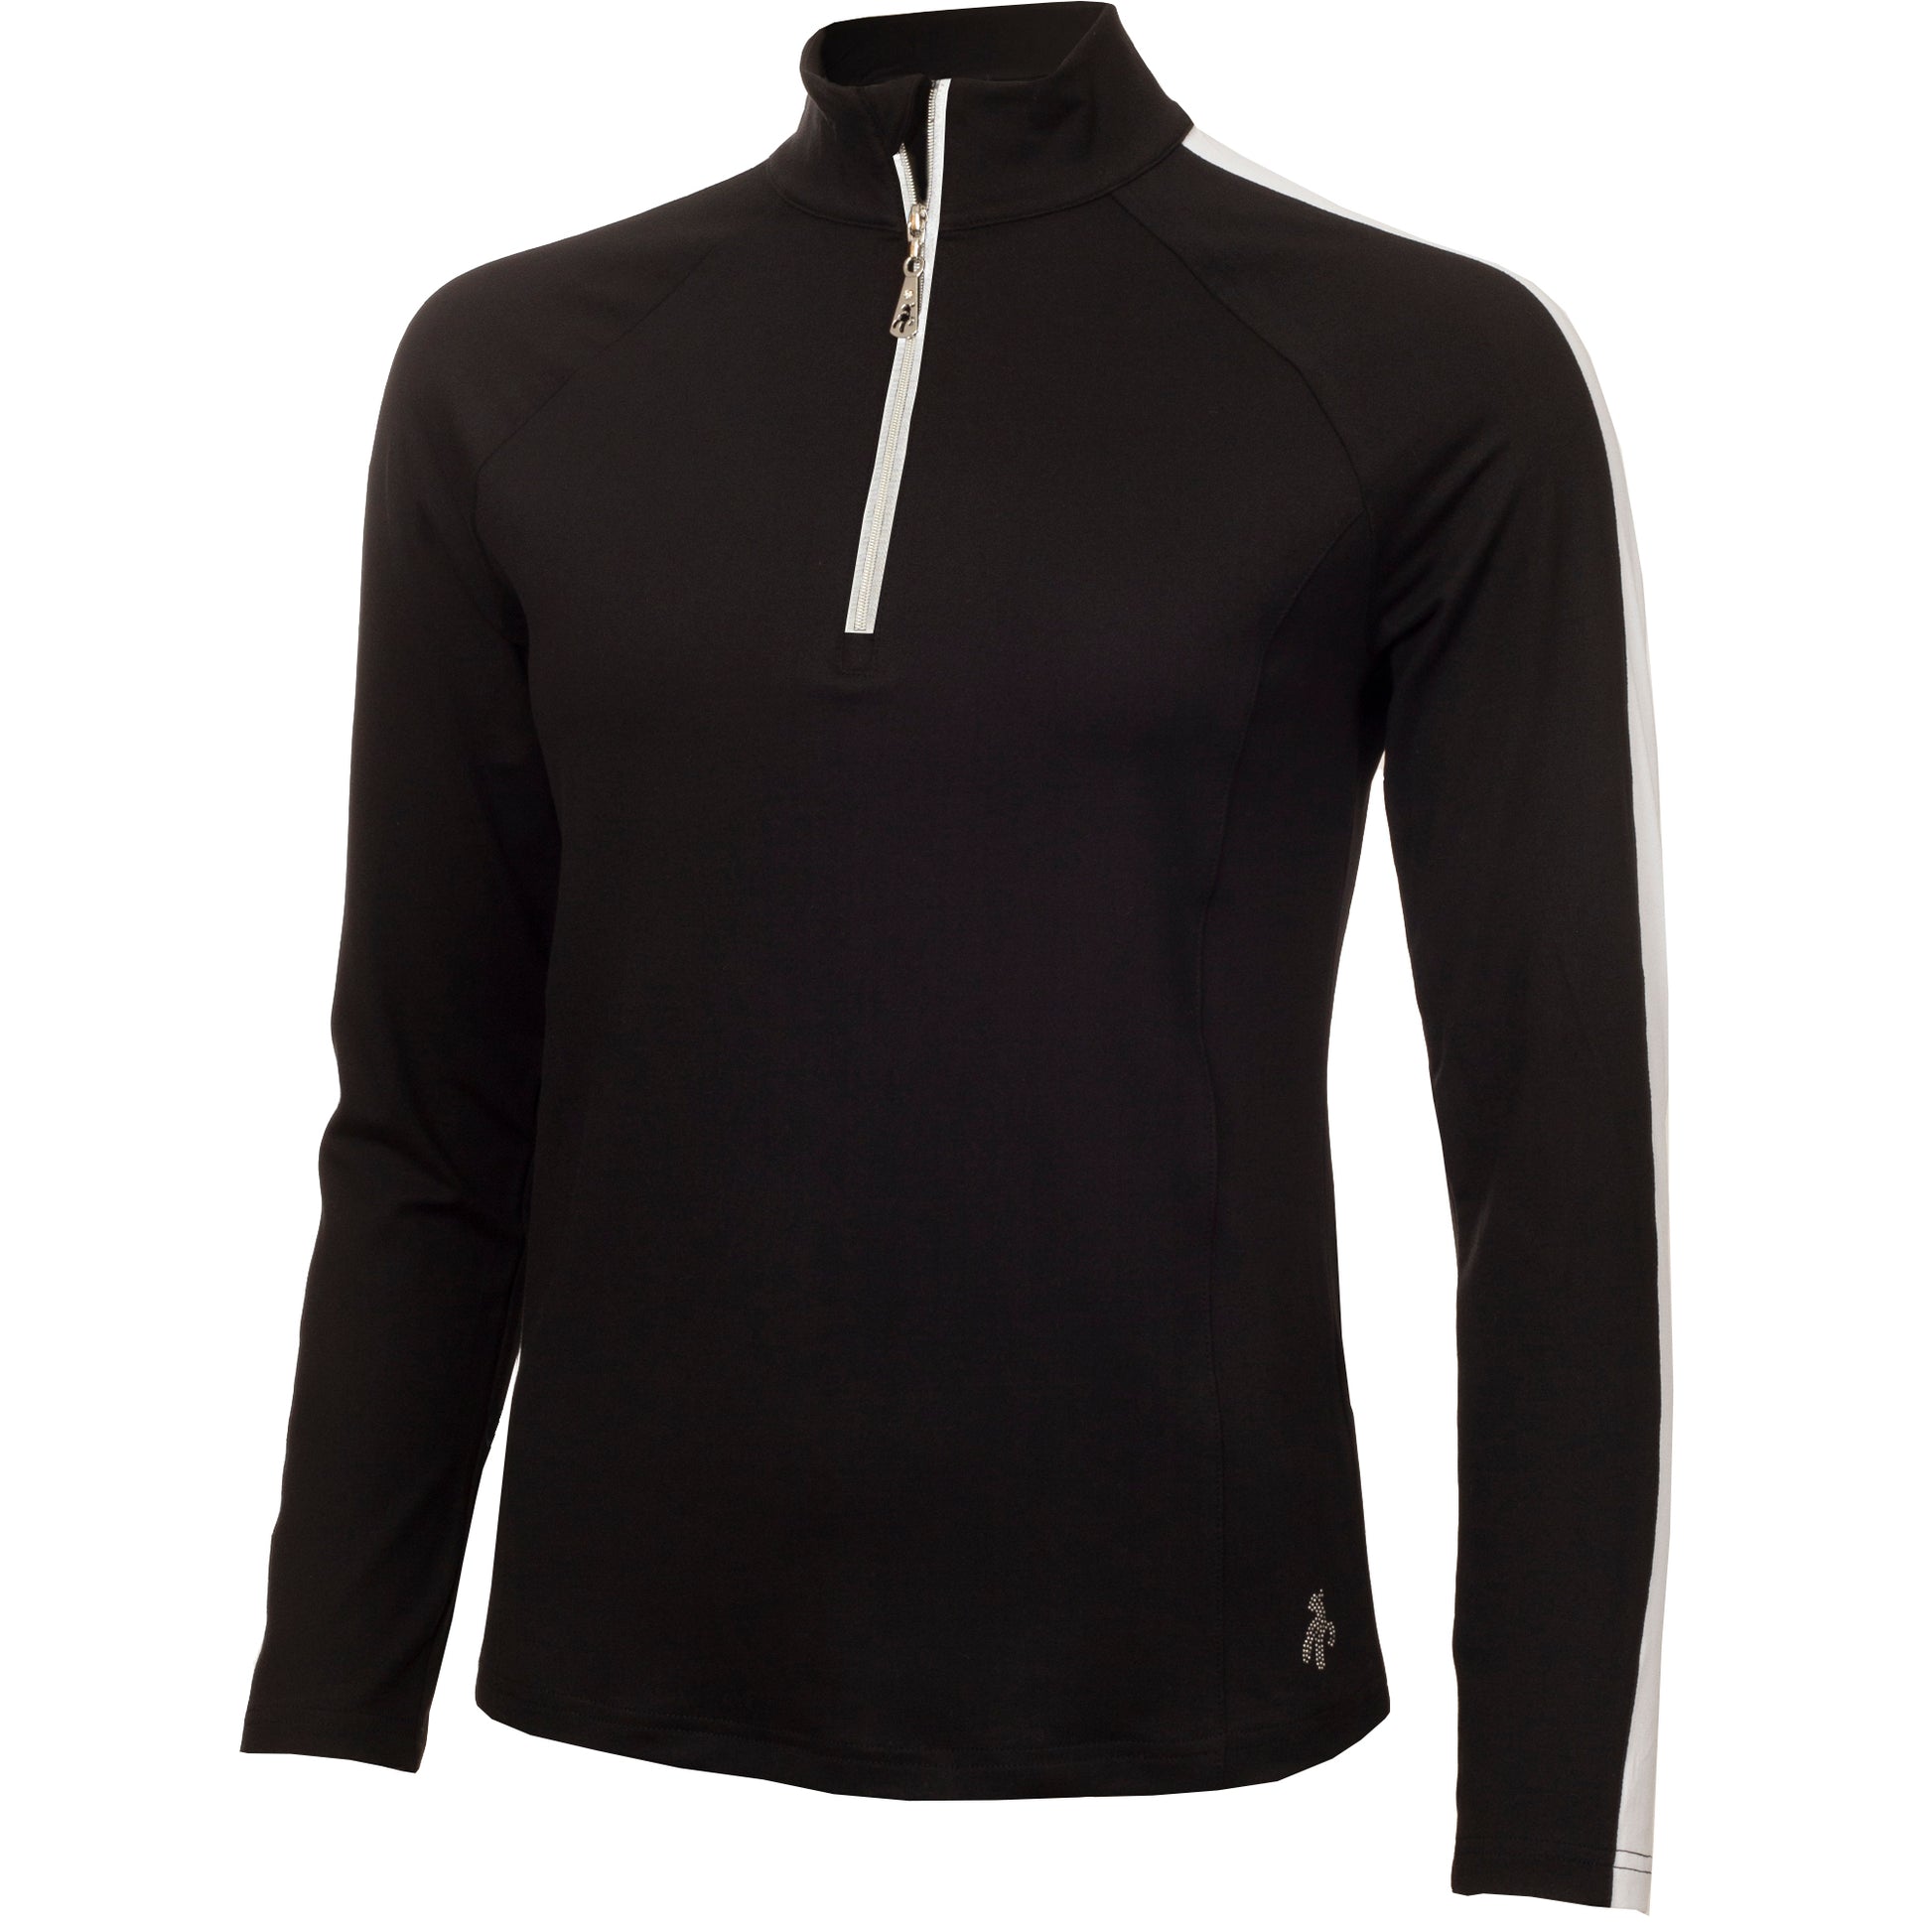 Green Lamb Ladies 1/4 Zip Neck Top with Contrast Stripes in Black/White